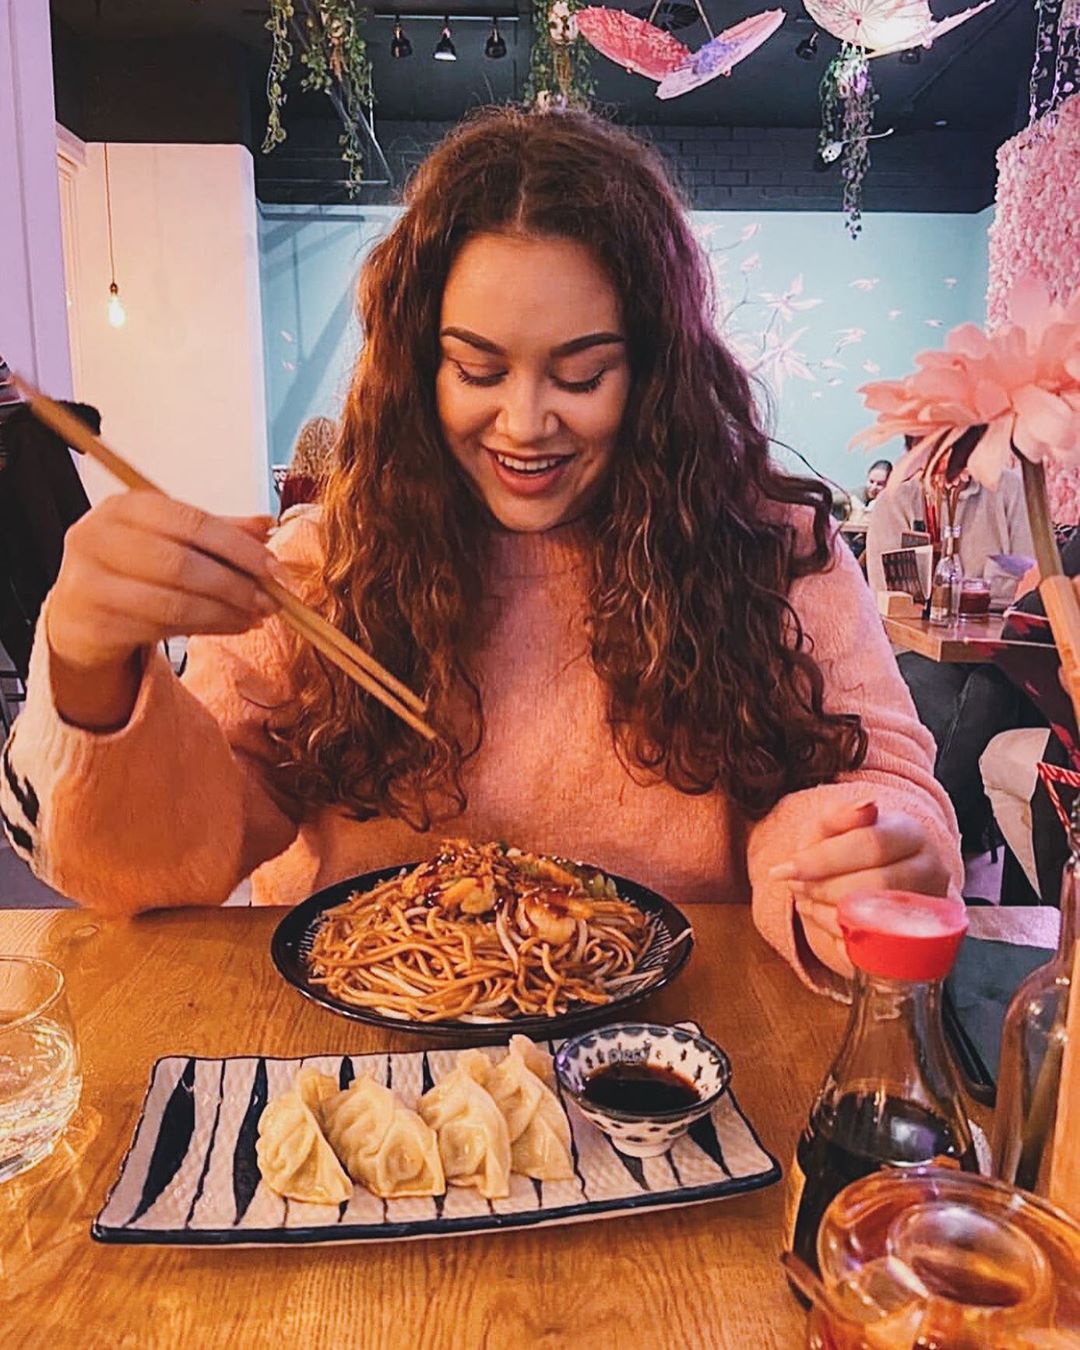 Who’s also always in the mood for food?? Repost @kimbeset ?
.
.
.
.
.
#XuNoodleBar #Tilburg #Noodles #Asian #Chinese #Food #Hotspot #FollowUs #SendNoods #foodie #instafood #Repost